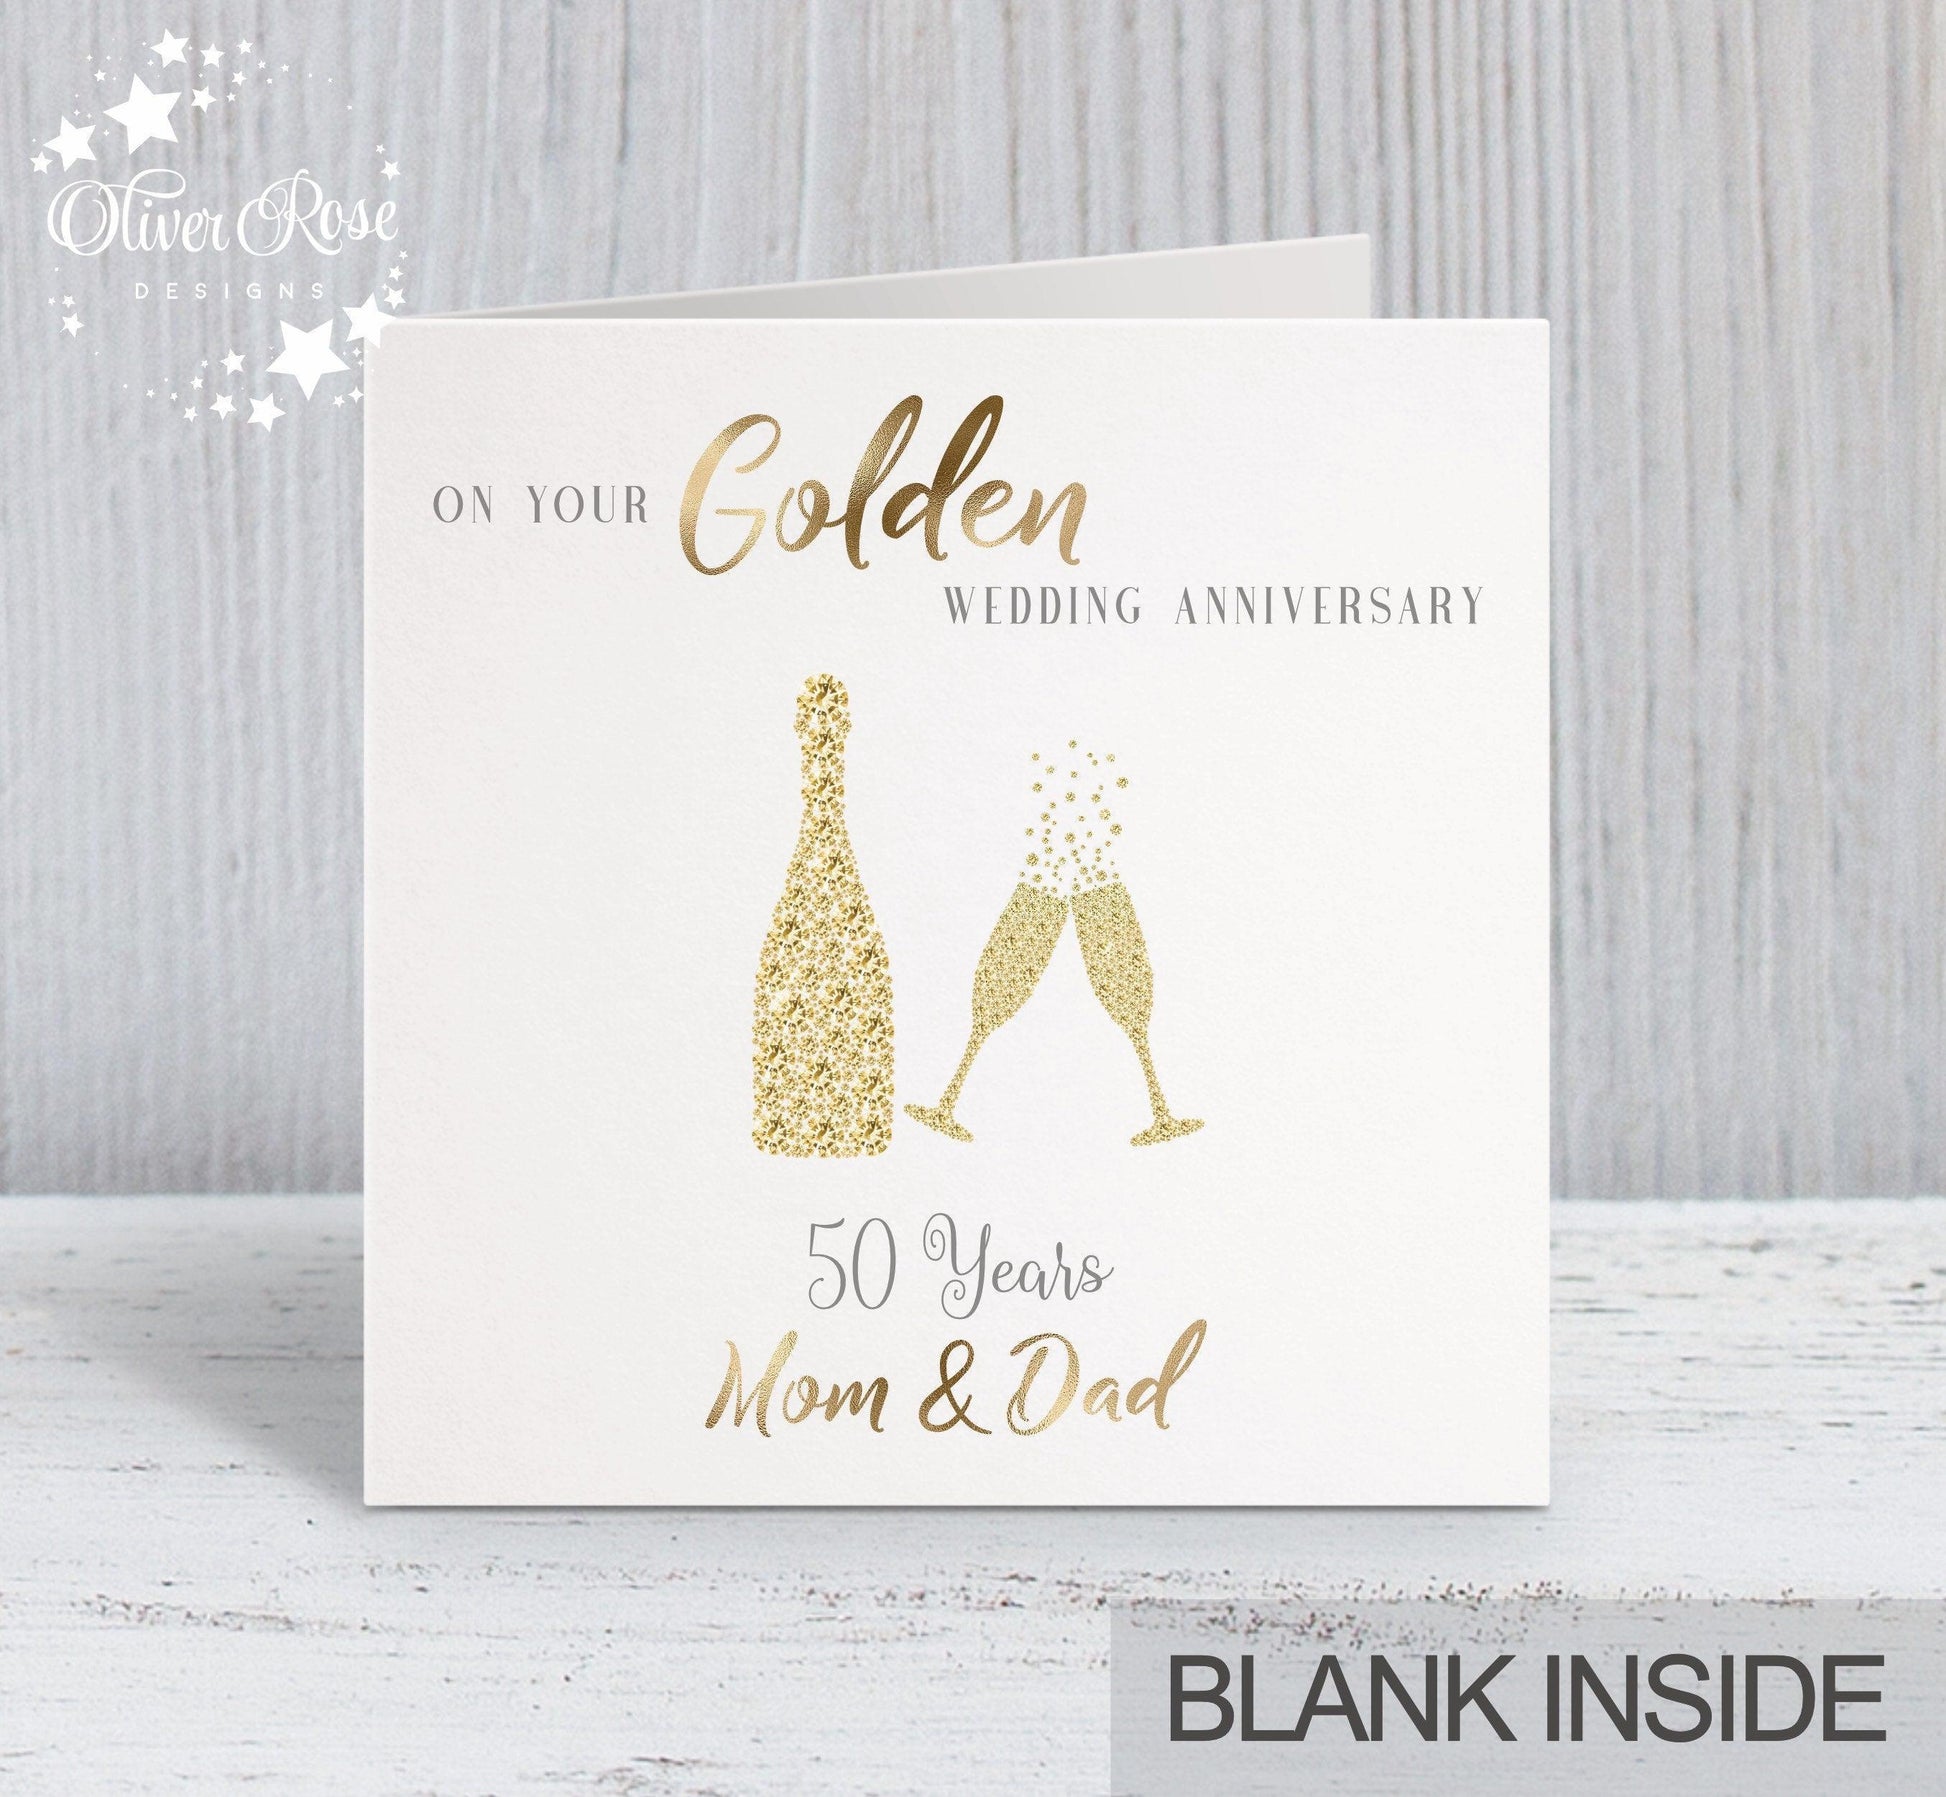 50th Golden Anniversary Card, On your Golden Anniversary, Mum & Dad, 50 years